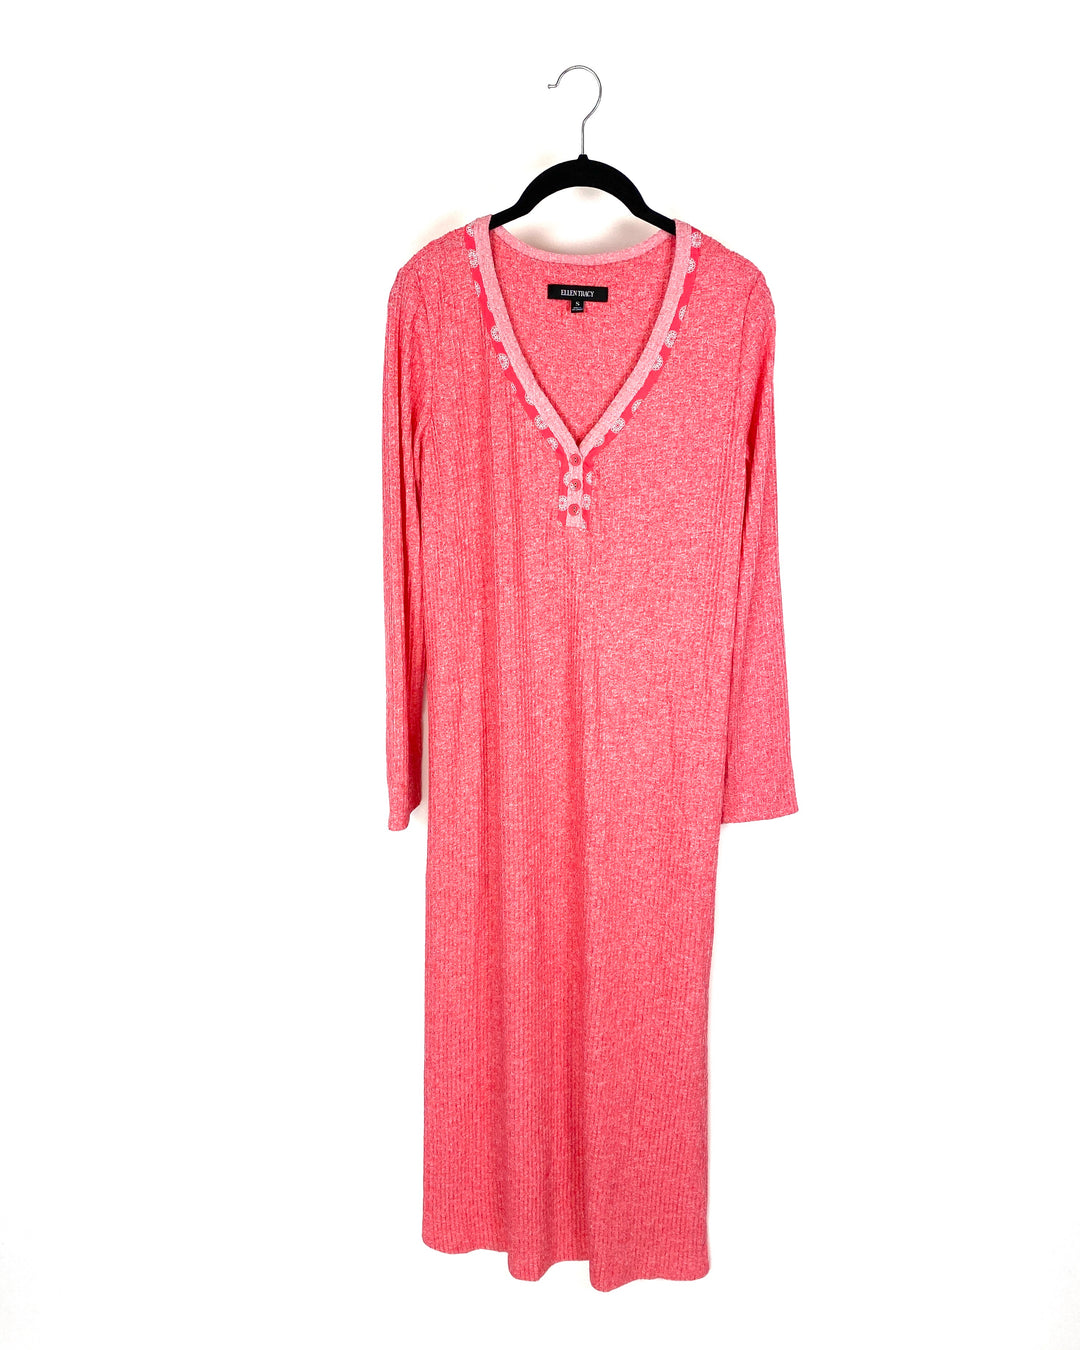 Coral Long Sleeve Dress - Small